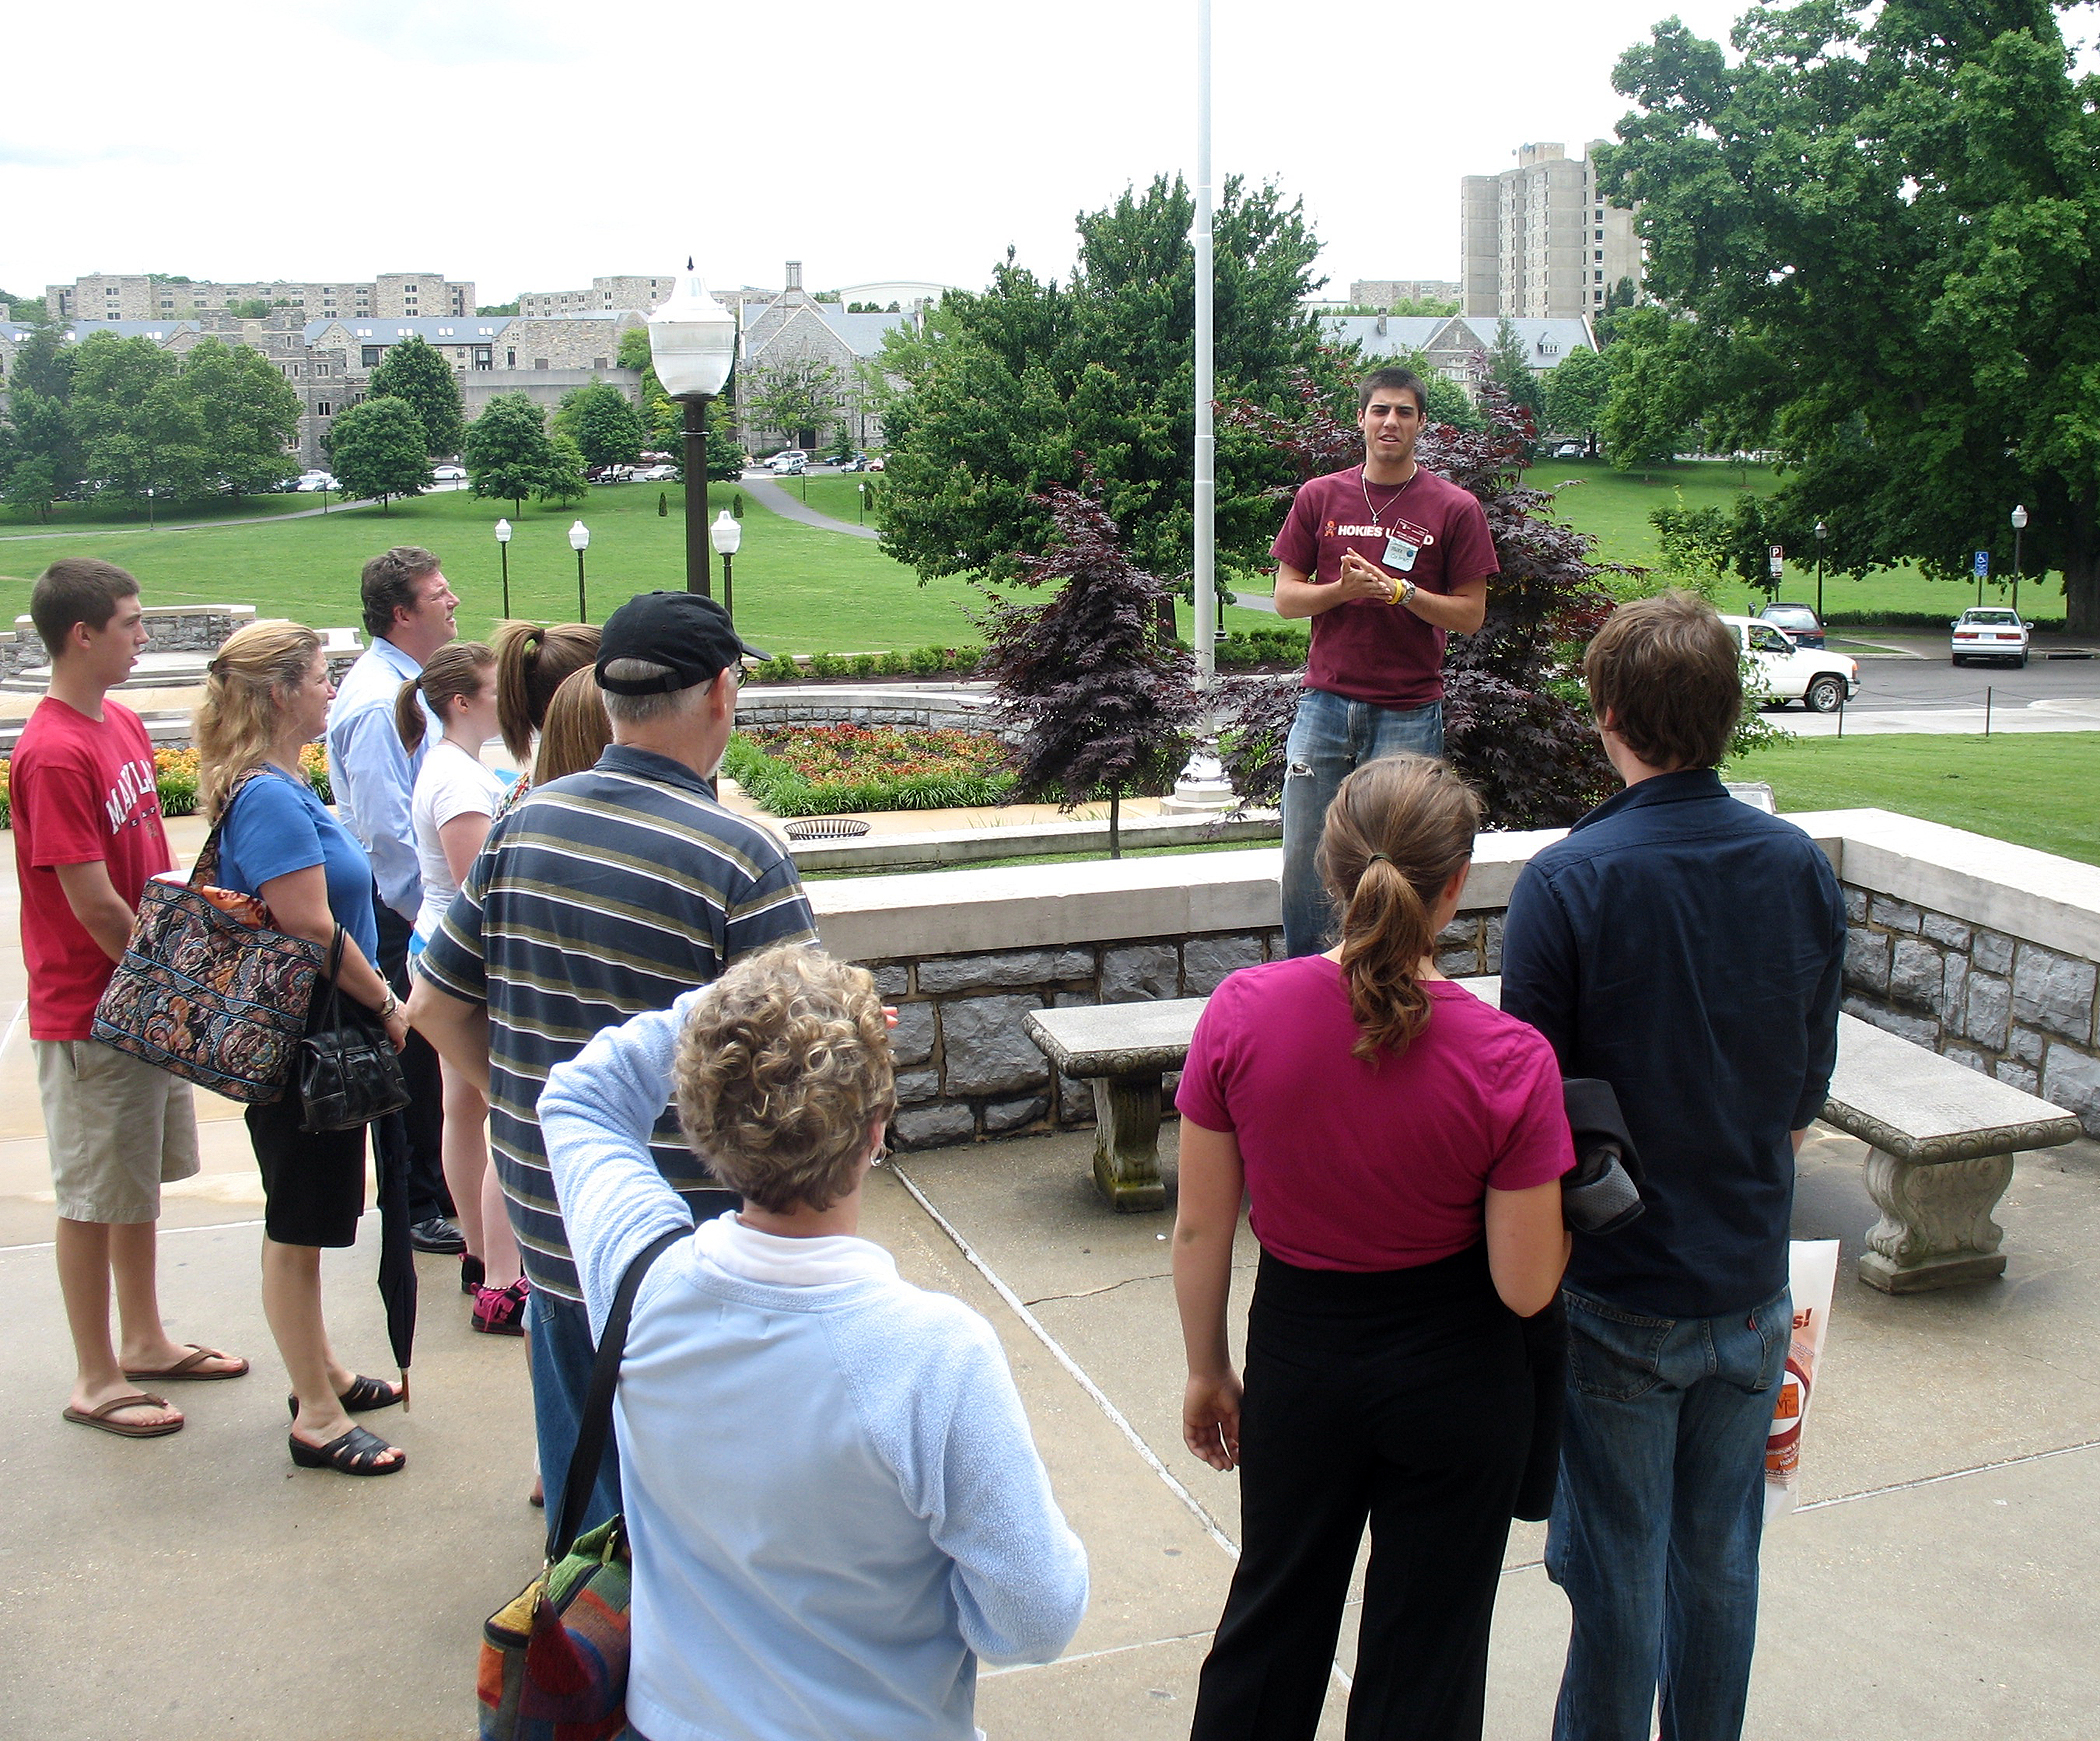 Michael Cardman, a junior from Harrisonburg, Va., majoring in civil engineering in the College of Engineering, conducts a campus tour for potential students and their families.